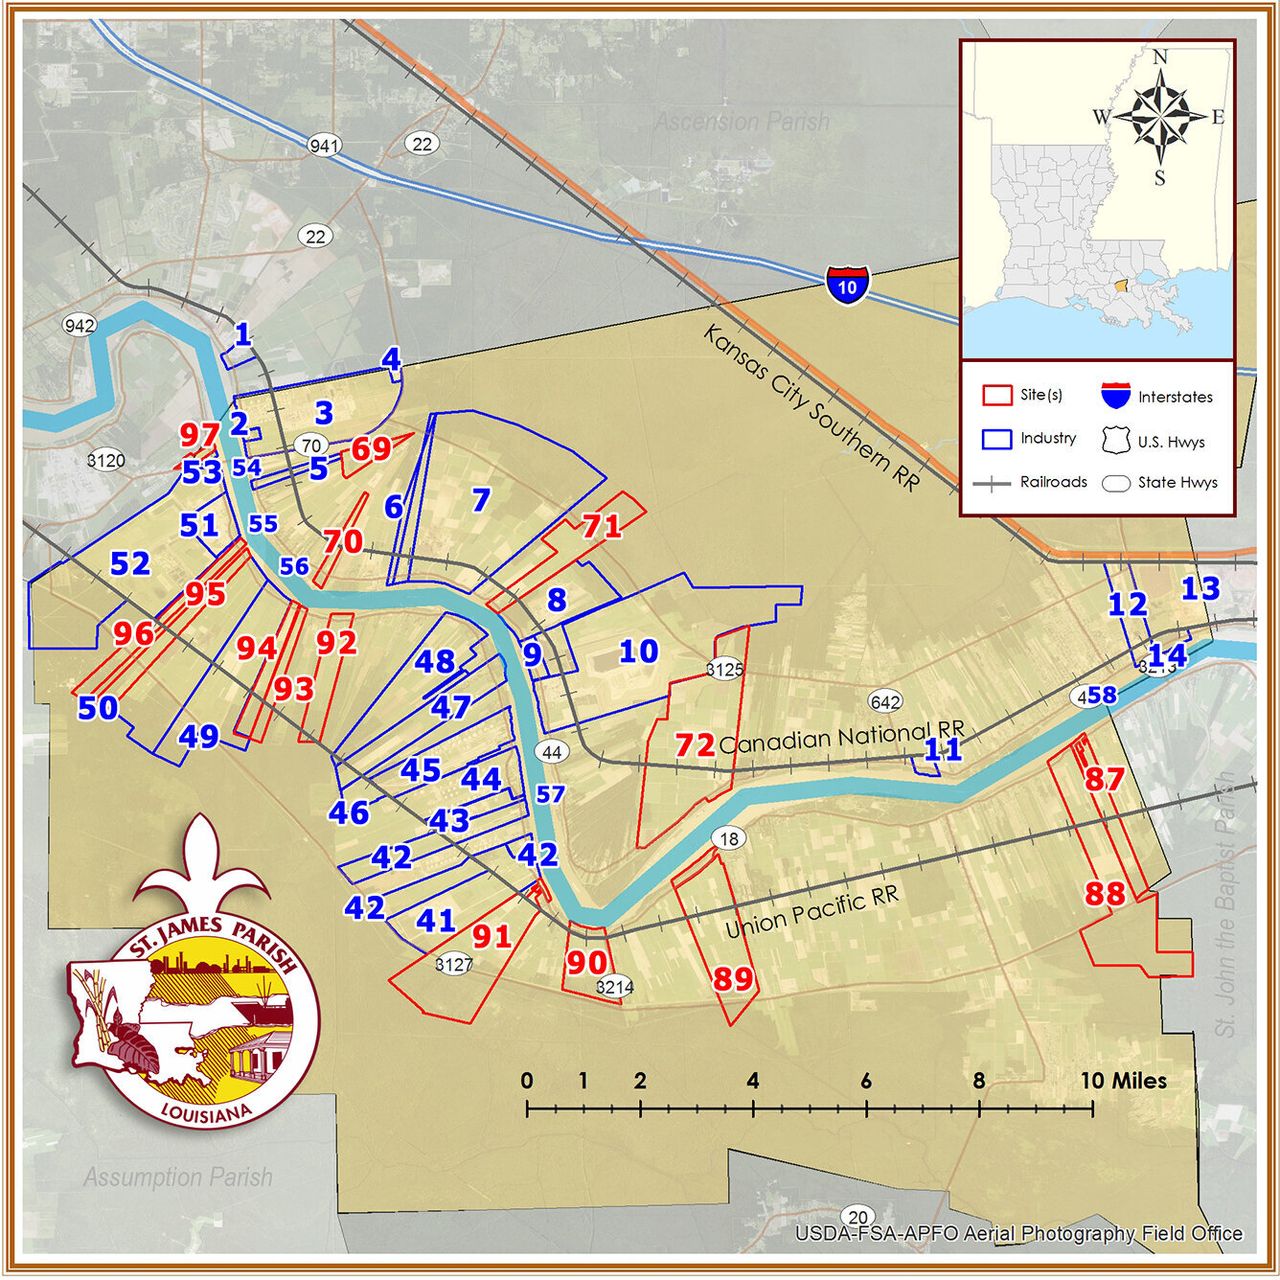 This map shows sites in blue where gas, oil, chemical and agricultural facilities are located in St. James Parish. Plots available for sale and marketed by the Port of South Louisiana are shown in red. Formosa has purchased sites 49 and 50 for its planned petrochemical complex.